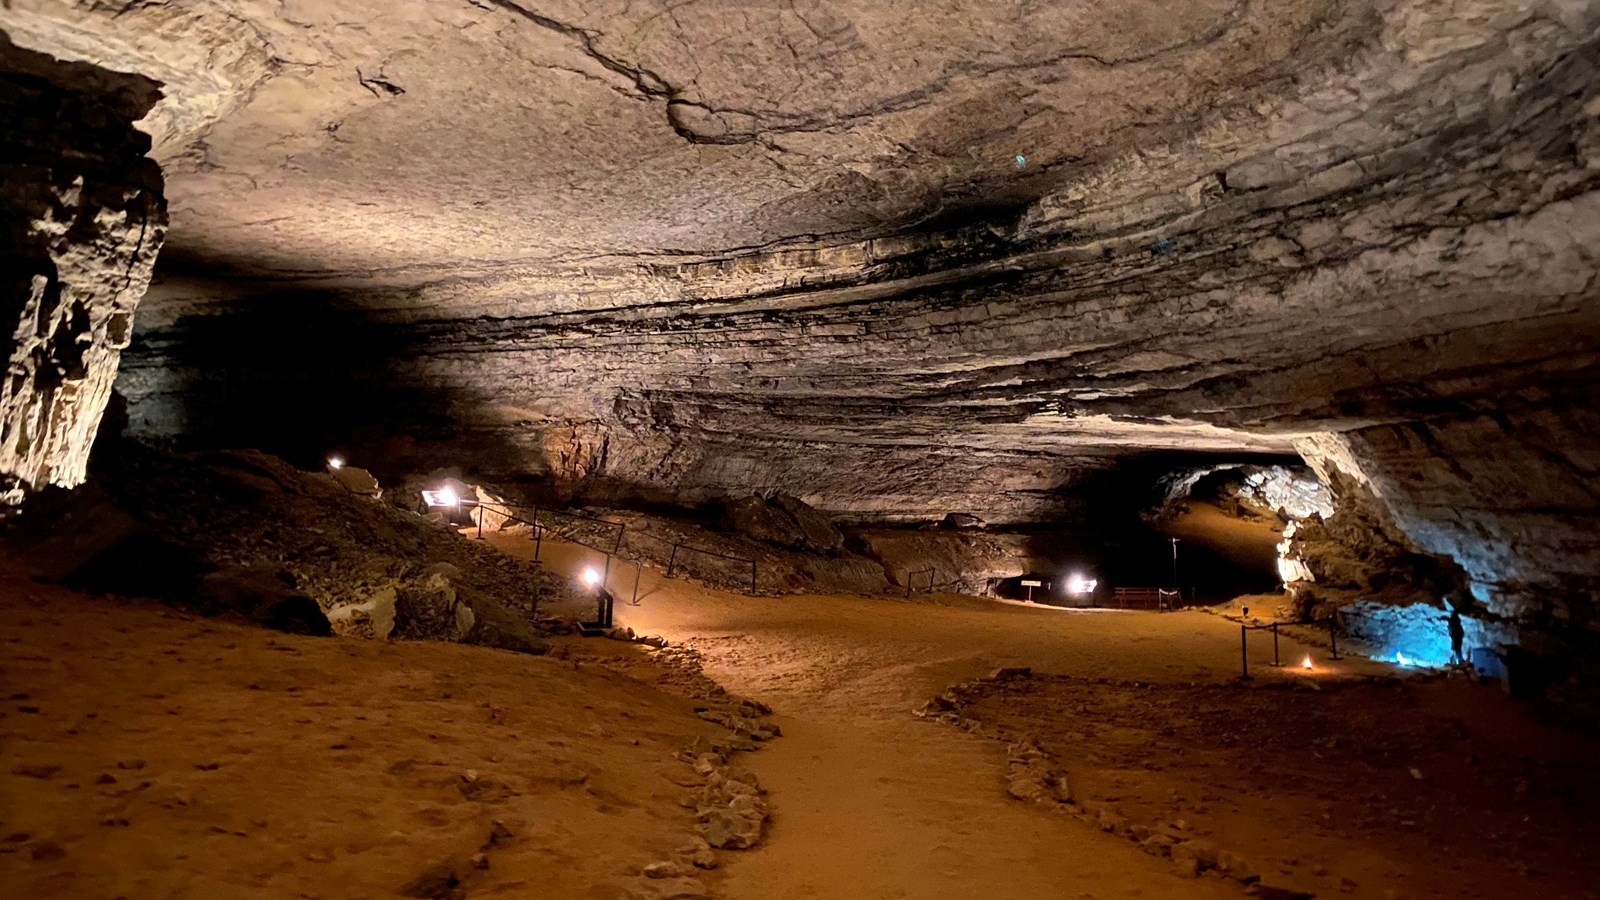 A large open cave room with dirt trails lined with rocks. 